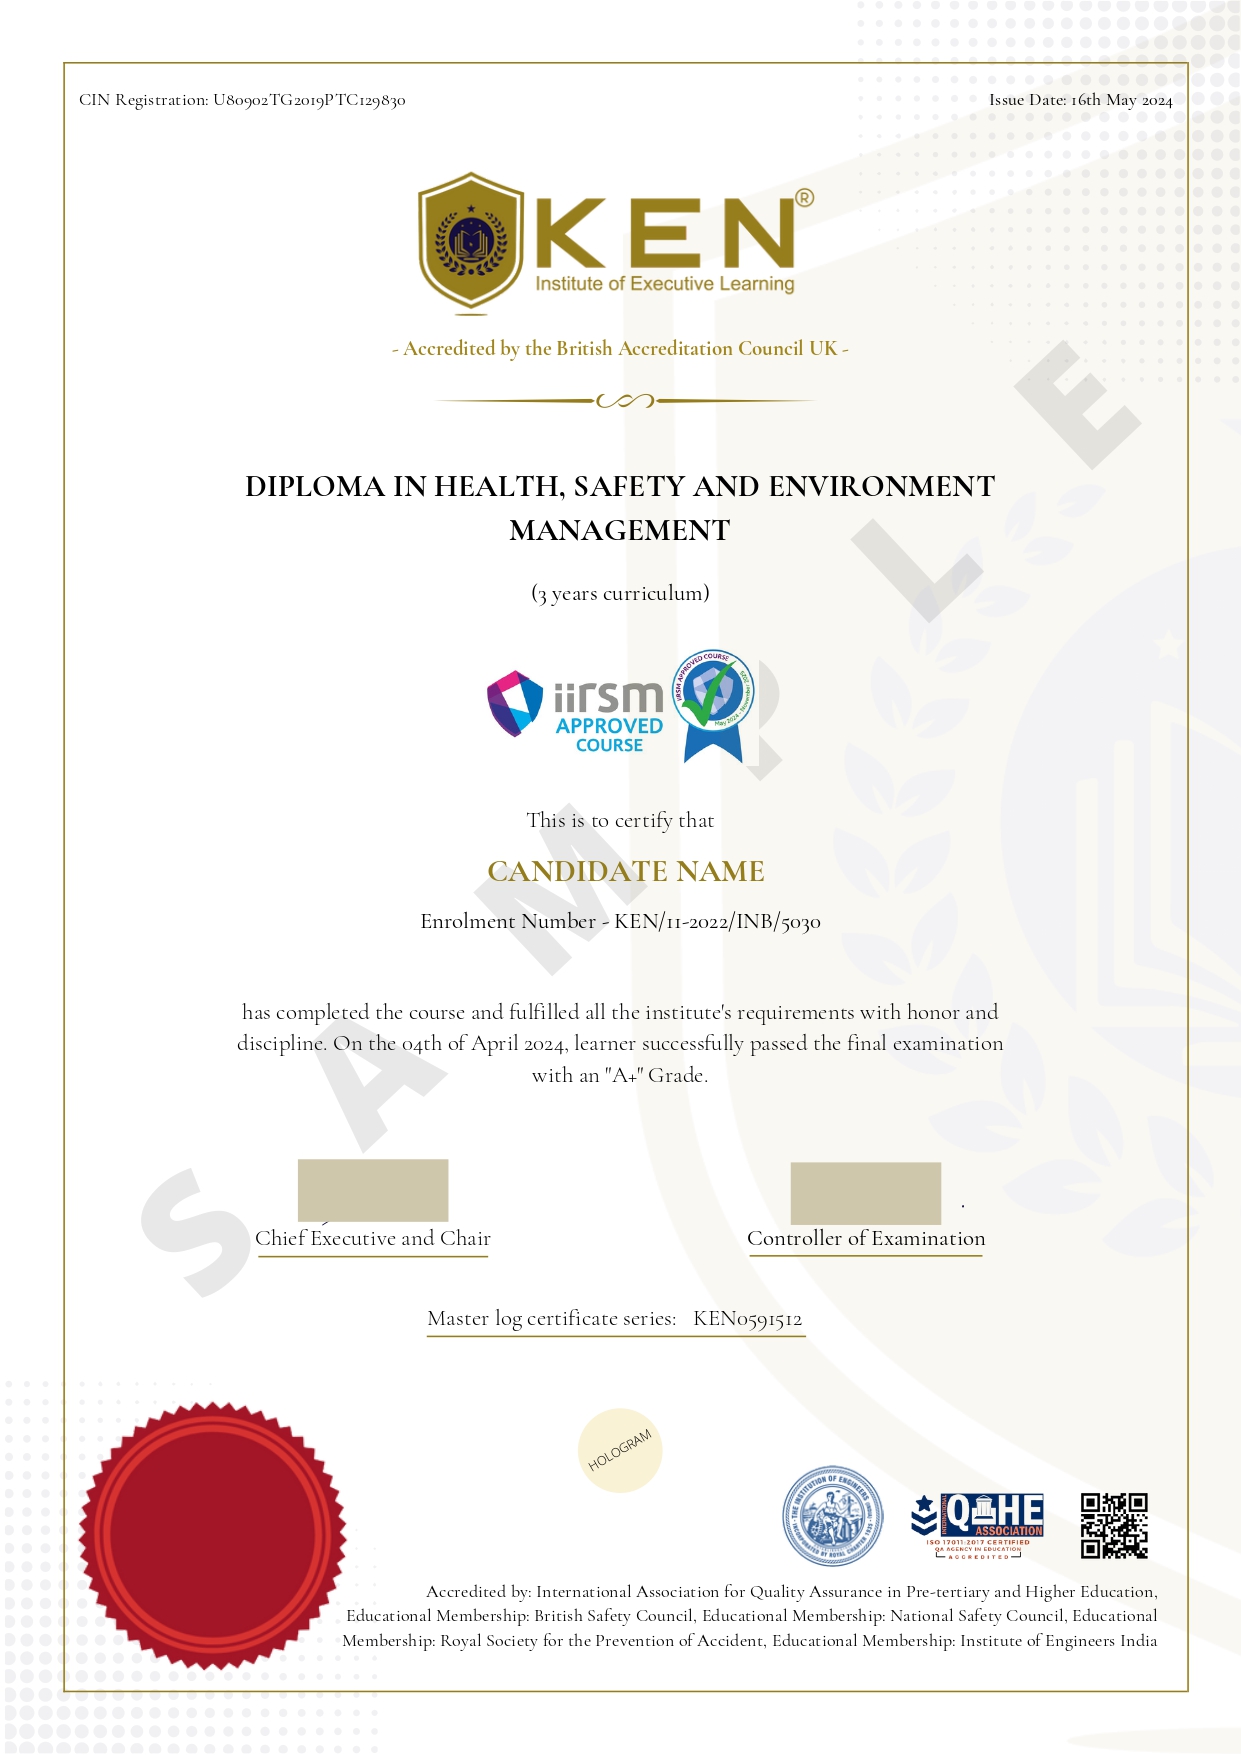 Diploma in Health Safety & Environment Management